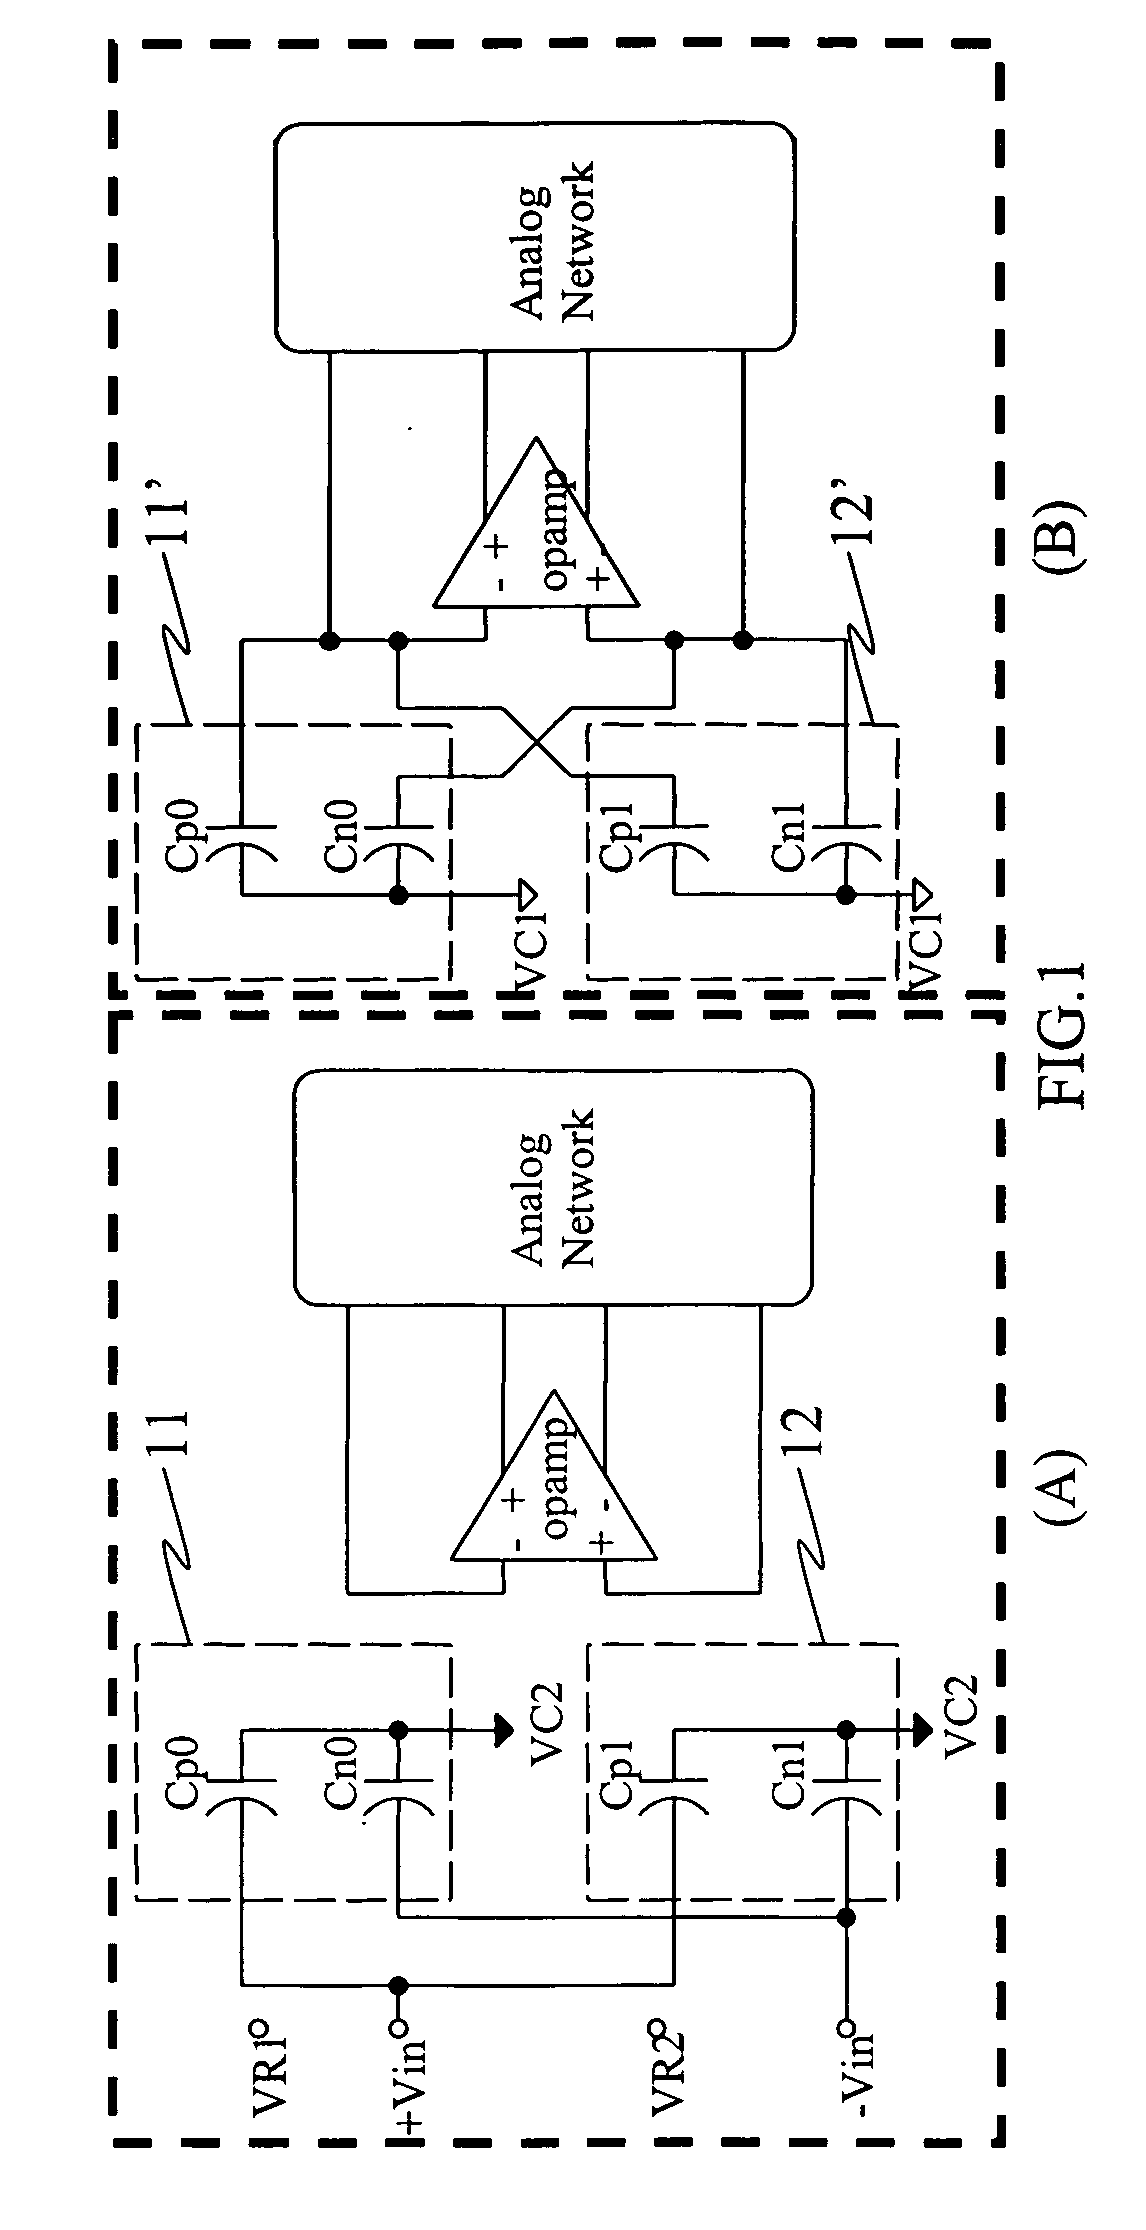 Reconfigurable switched- capacitor input circuit with digital-stimulus acceptability for analog tests